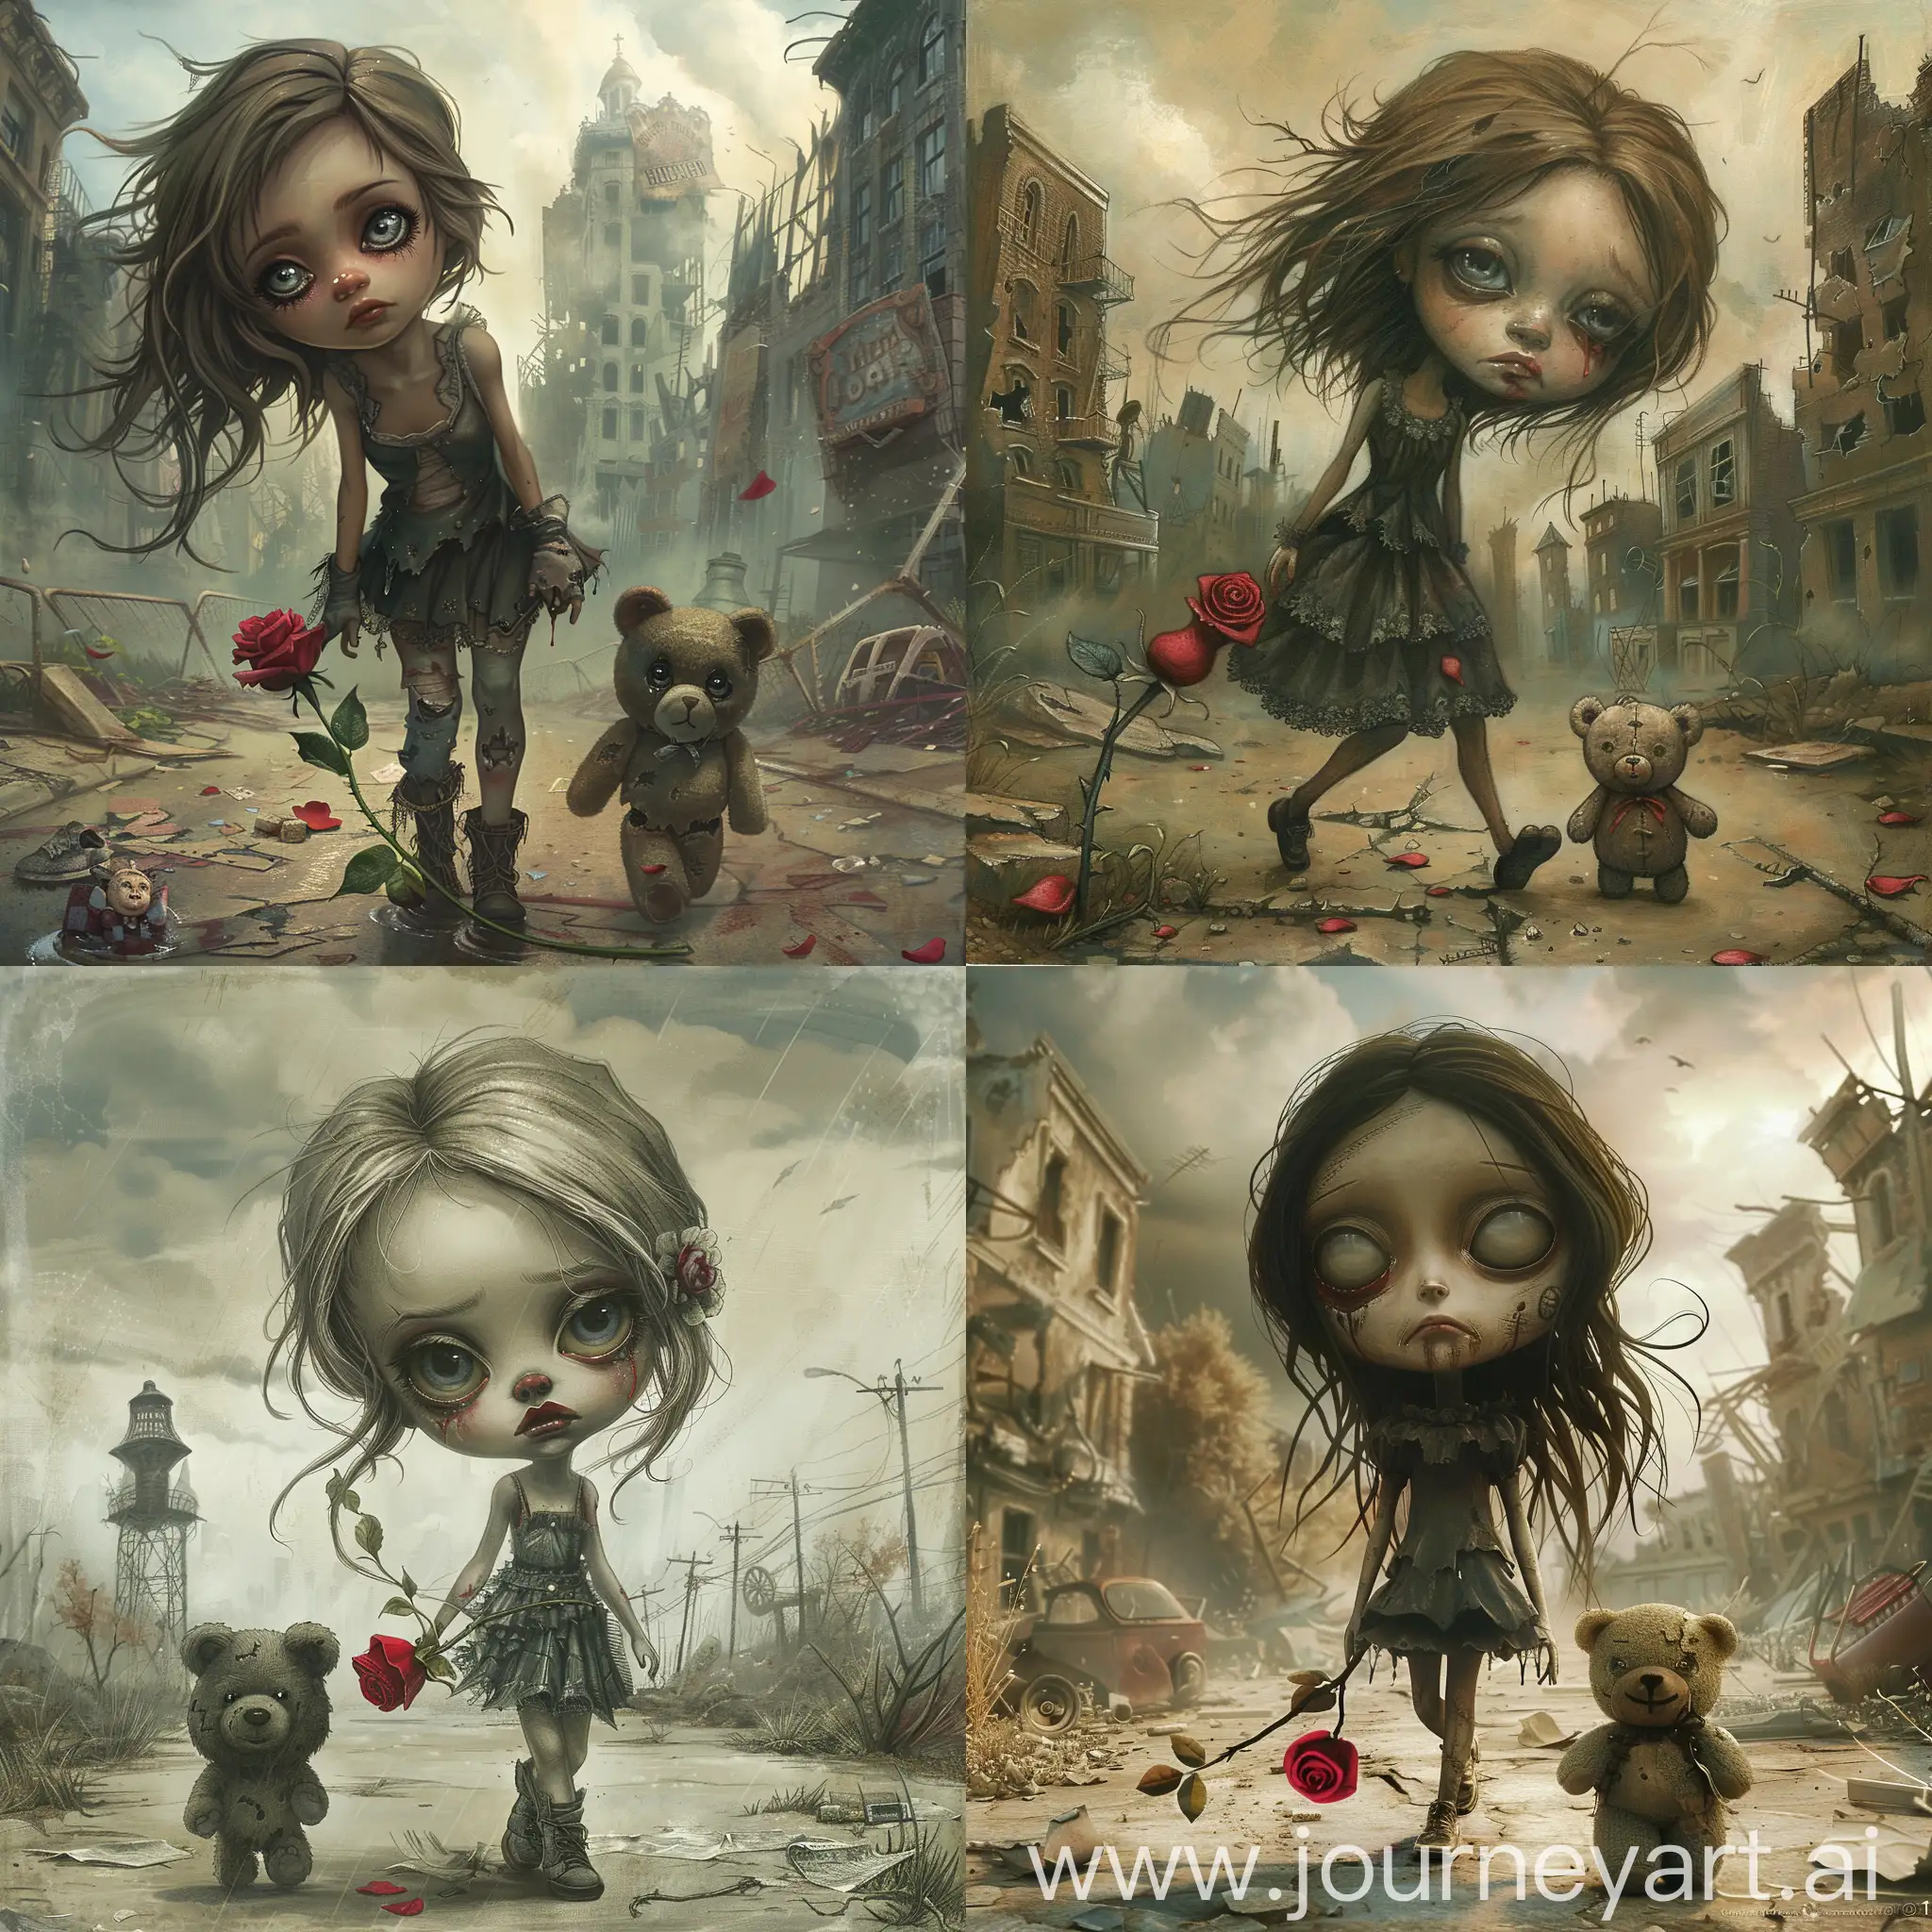 A beautiful girl with sad eyes. Tim Burton style. She is walking through dystopian , post apocalyptic, abandoned America and carrying a red rose. A small sad teddy bear is walking along beside her.